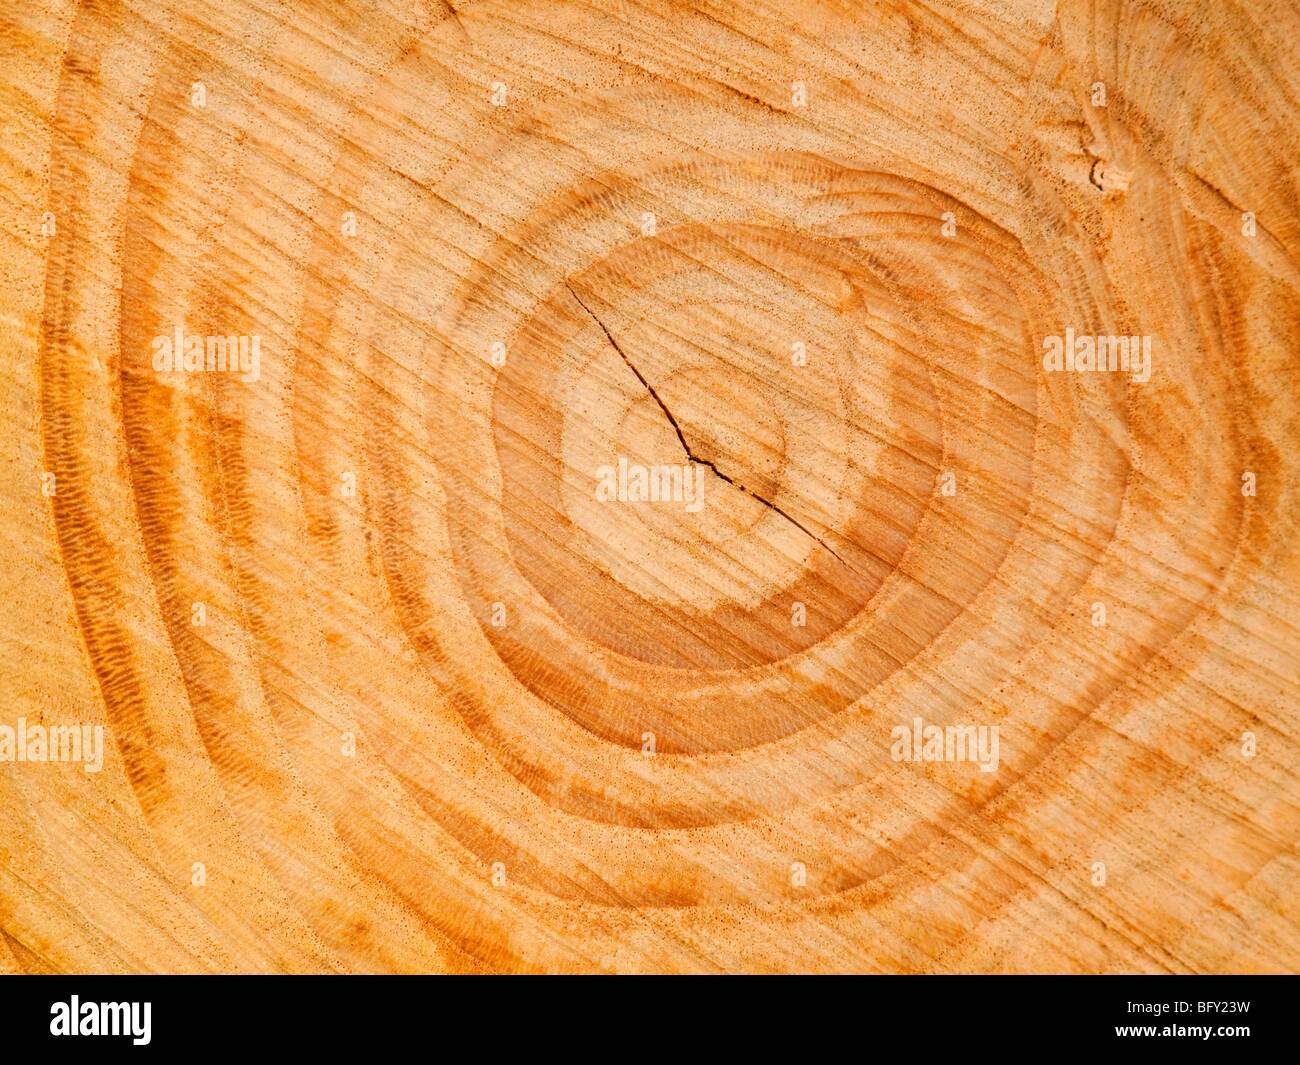 Tree Rings in Doodle Style. Hand Drawn Trunk Cross Section Texture Stock  Vector - Illustration of outline, sketch: 264295990